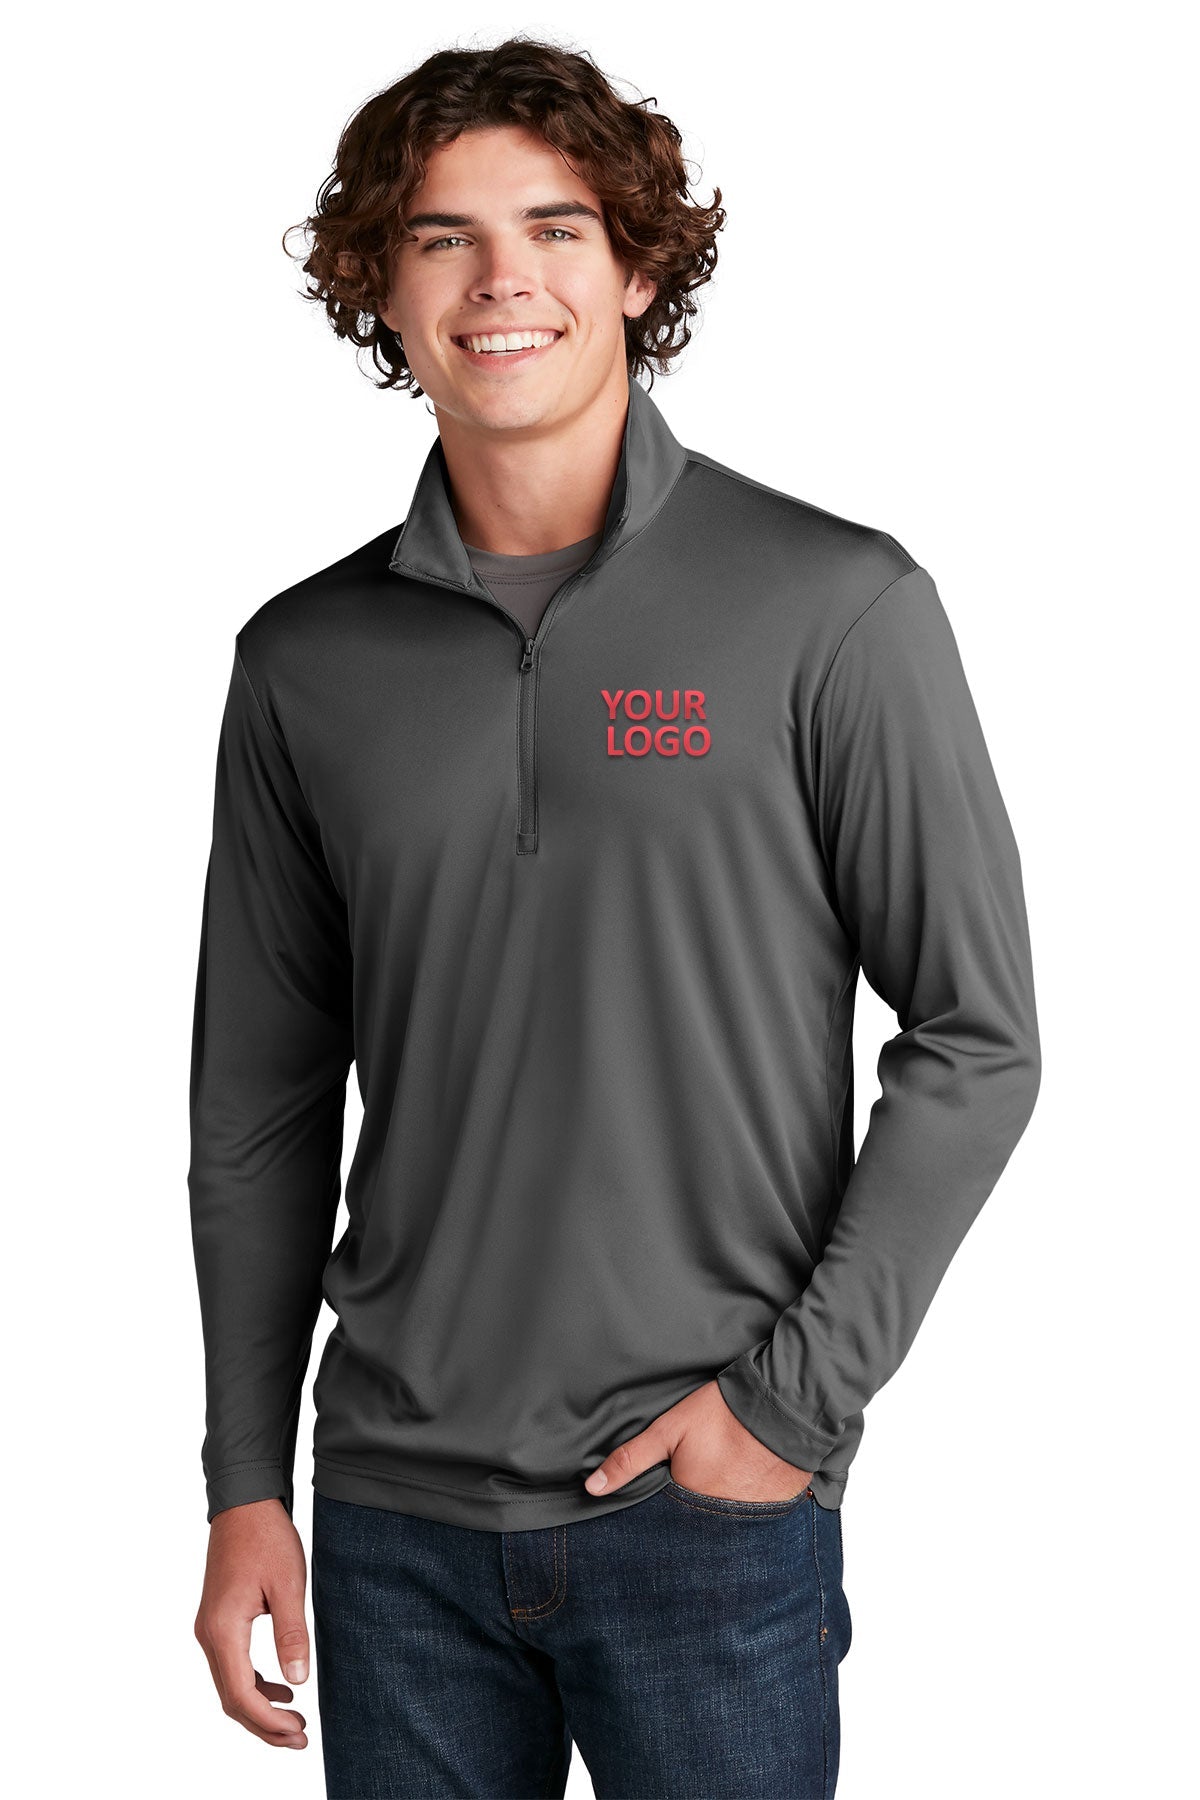 Sport-Tek PosiCharge Competitor Customized 1/4-Zip Pullovers, Iron Grey